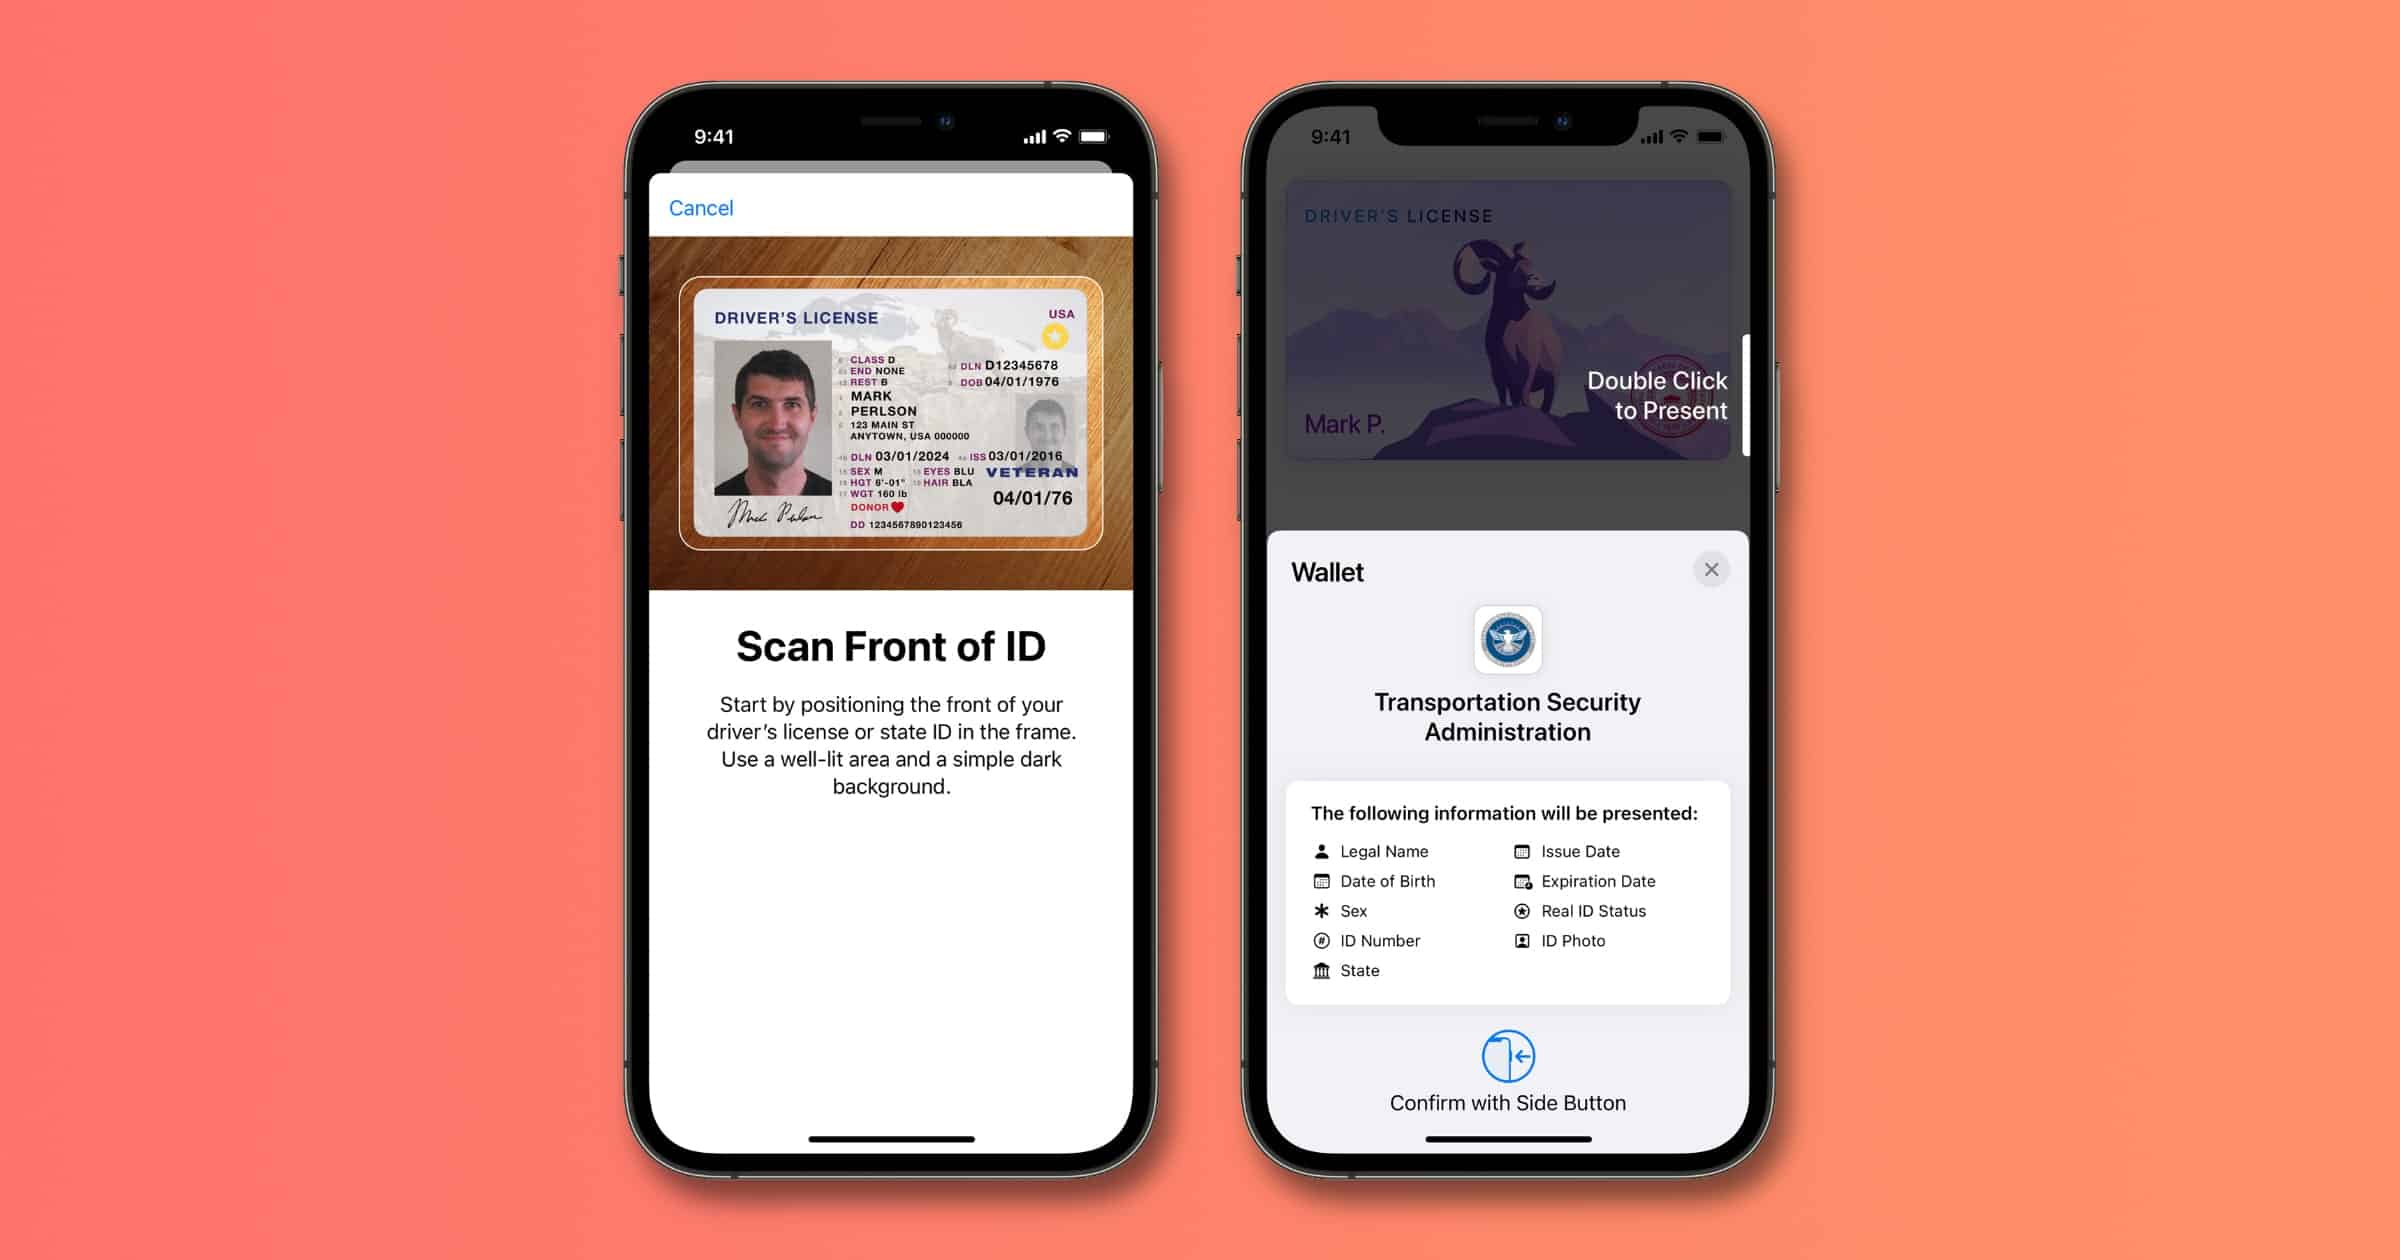 ISO Approves and Publishes Standard for Mobile Driver’s License